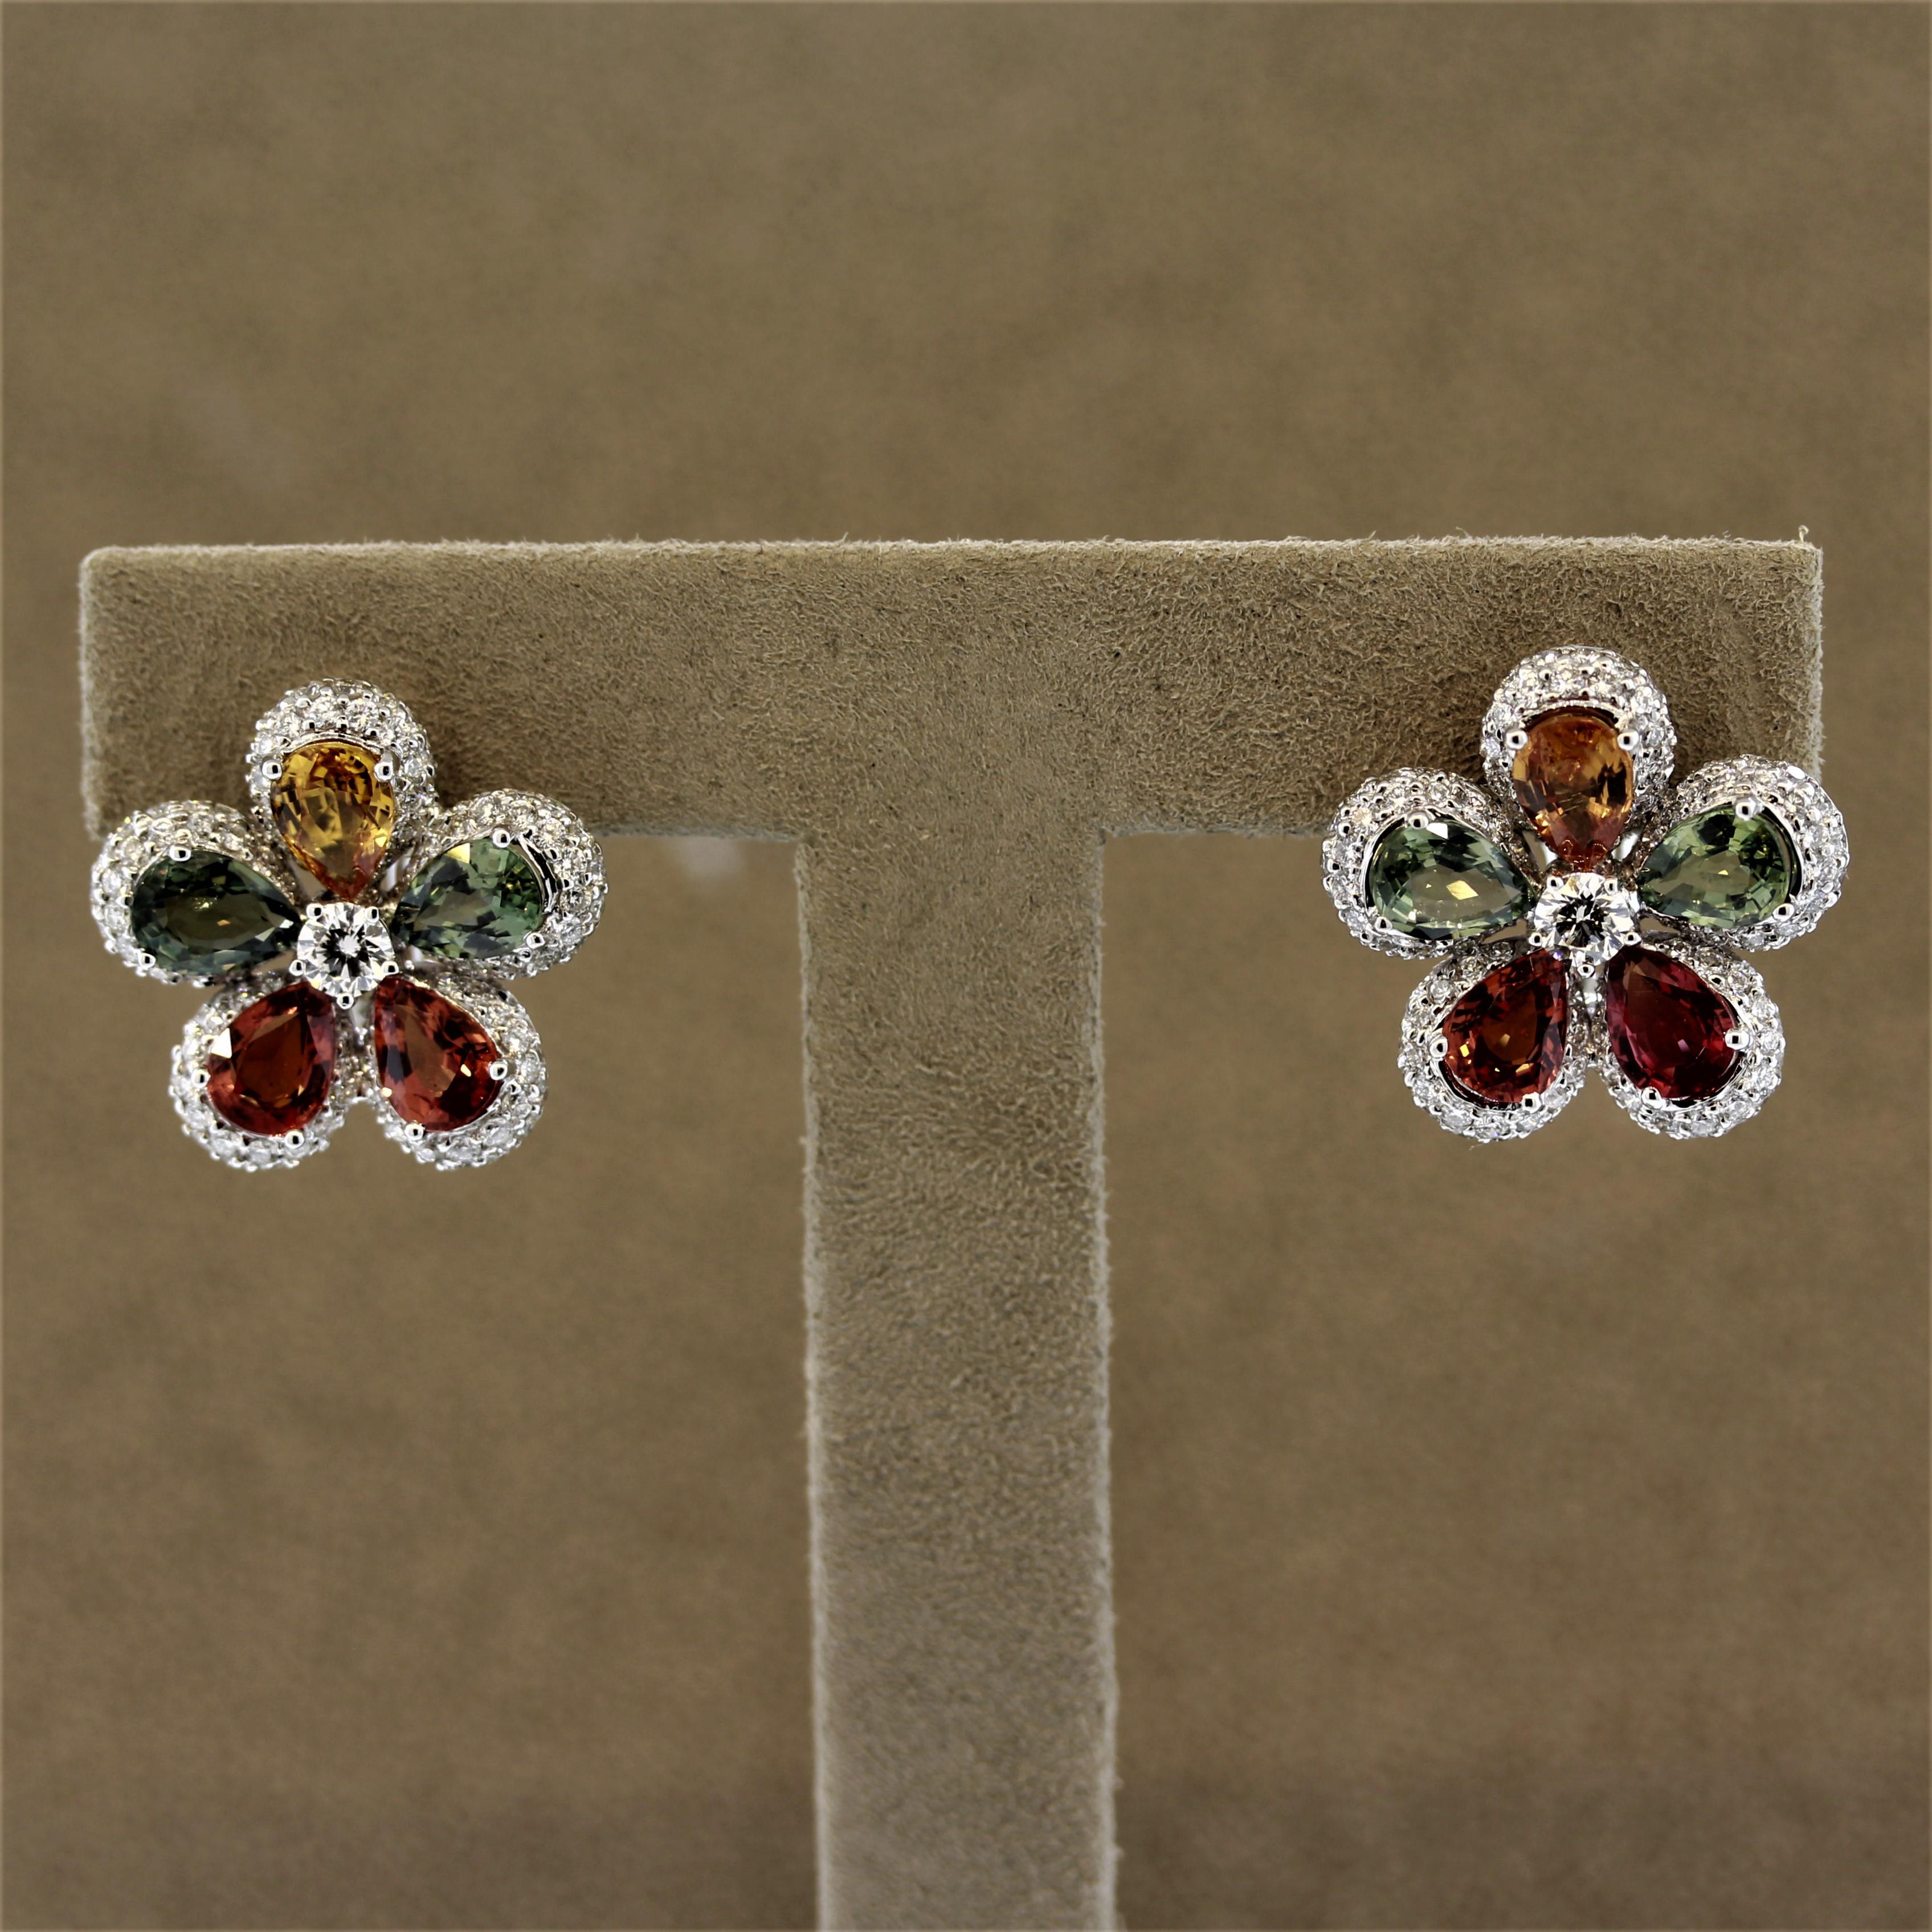 A beautiful pair of earrings featuring 10 pear shaped fancy colored sapphires weighing a total of 9.08 carats. They are accented by round brilliant cut diamonds set around the sapphires along with a larger diamond set in the center of the flower.